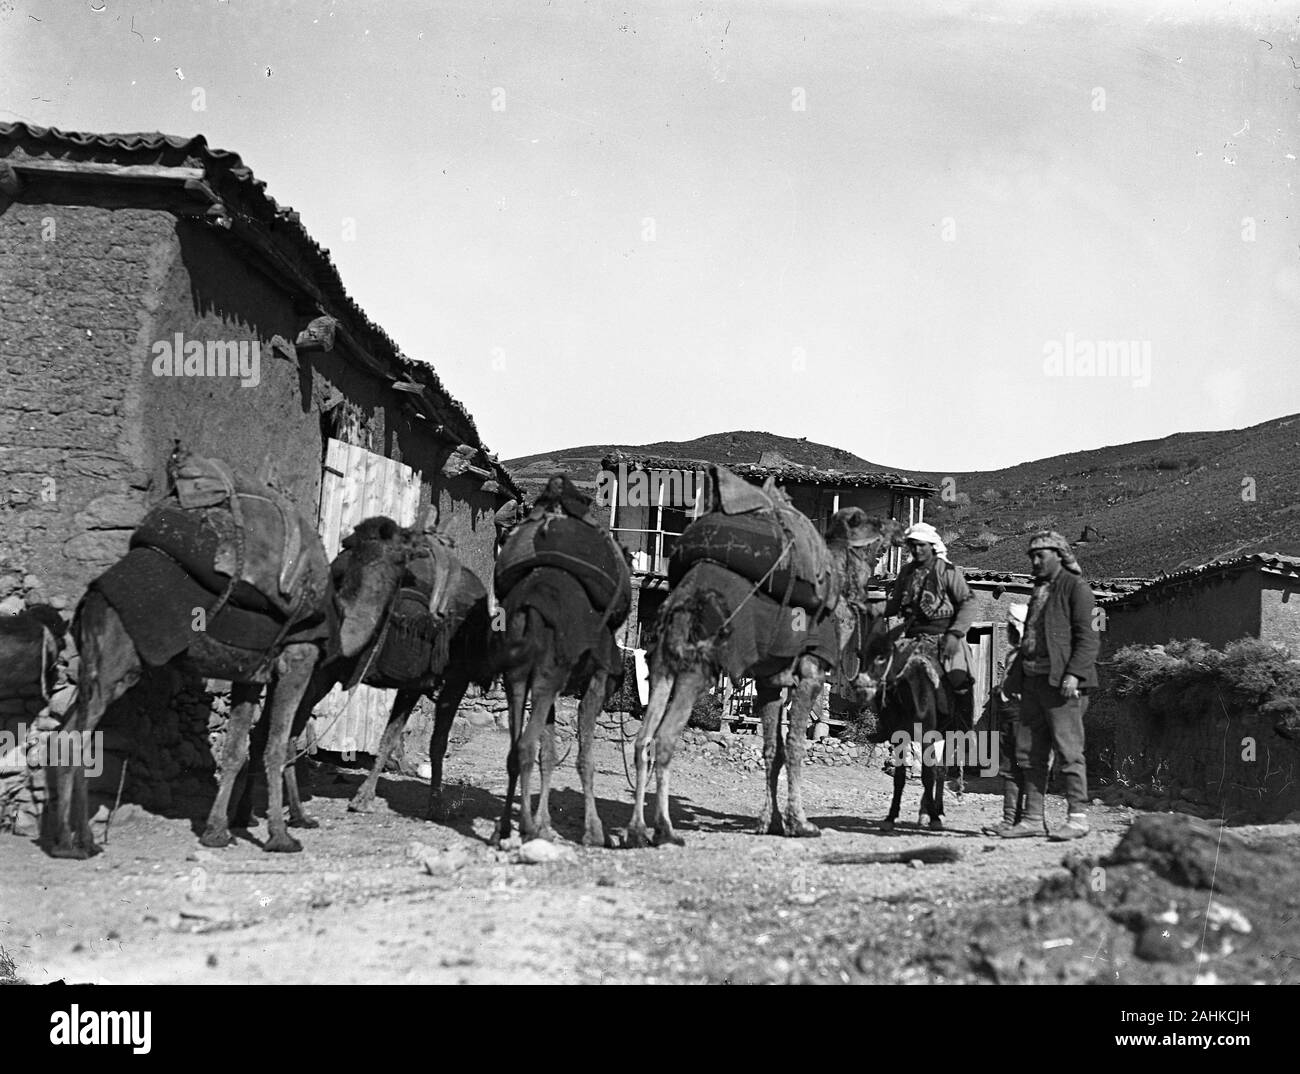 A small caravan of 4 camels packed with goods moving through a small mountain village in the western part of Ottoman Turkey. A man in traditional dress sitting on an donkey and another man standing accompanied by a boy and watching the beasts passing by. Photograph taken around 1910-1920. Copy from a dry glass plate, originating from the Herry W. Schaefer collection. Stock Photo